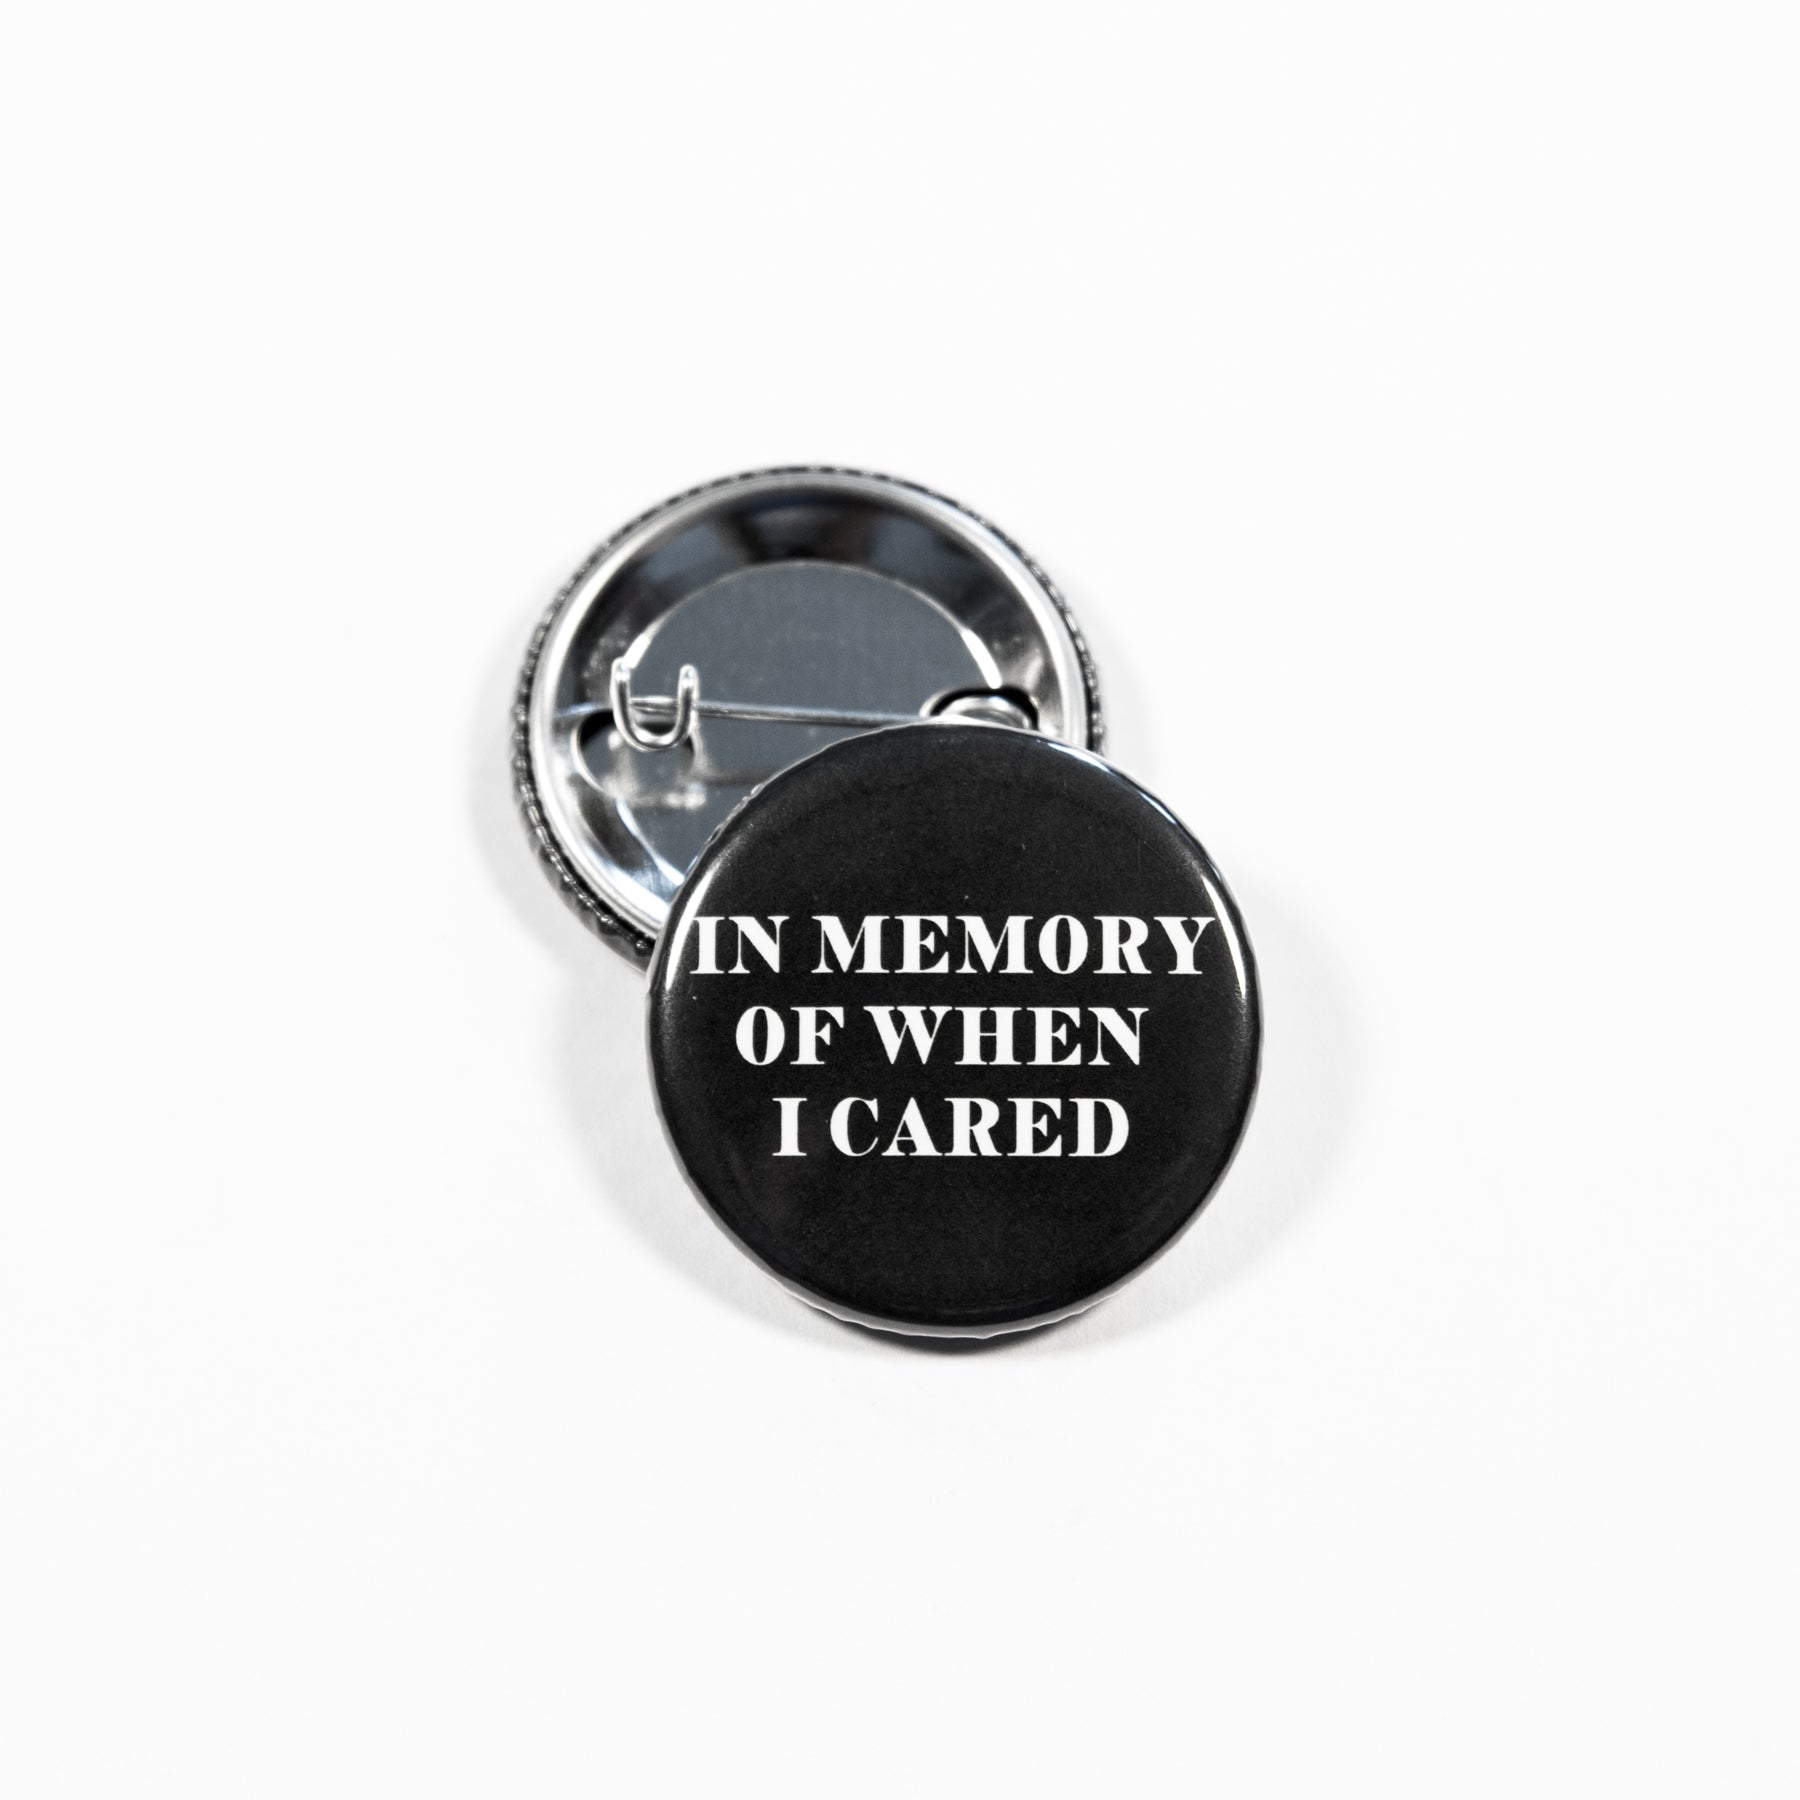 In Memory Of When I Cared Button